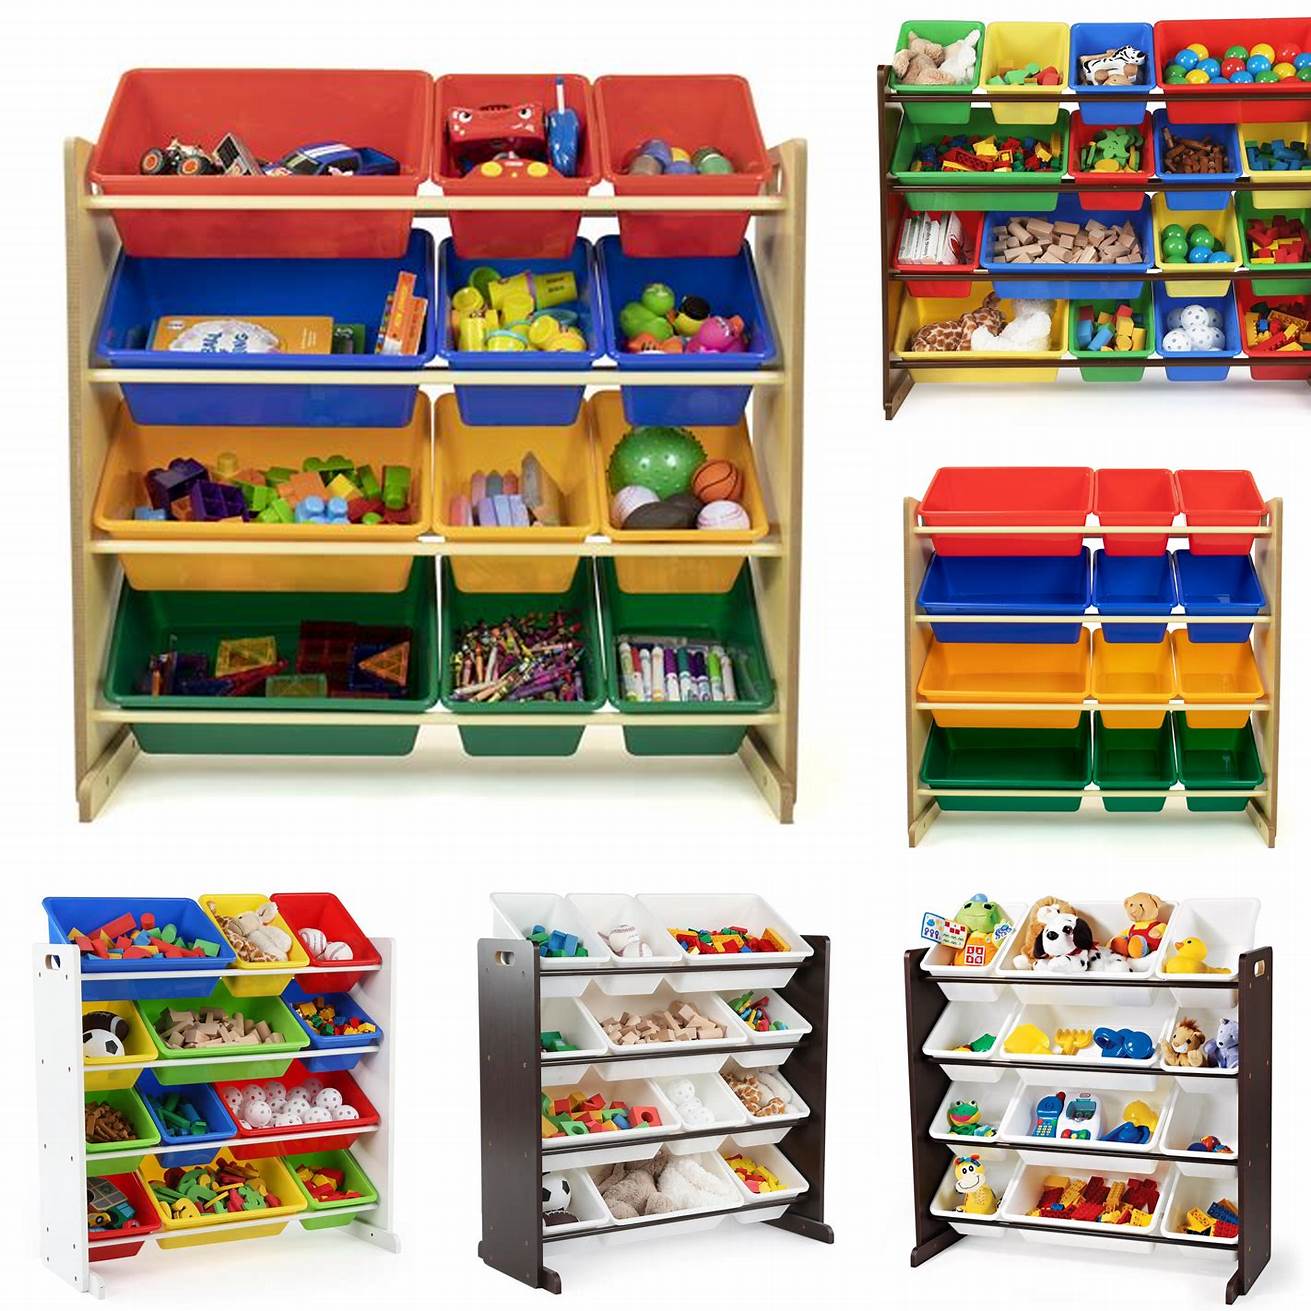 The Tot Tutors Kids Toy Storage Organizer is a great way to keep your childs toys organized It has 12 plastic bins in various sizes and comes in a variety of colors